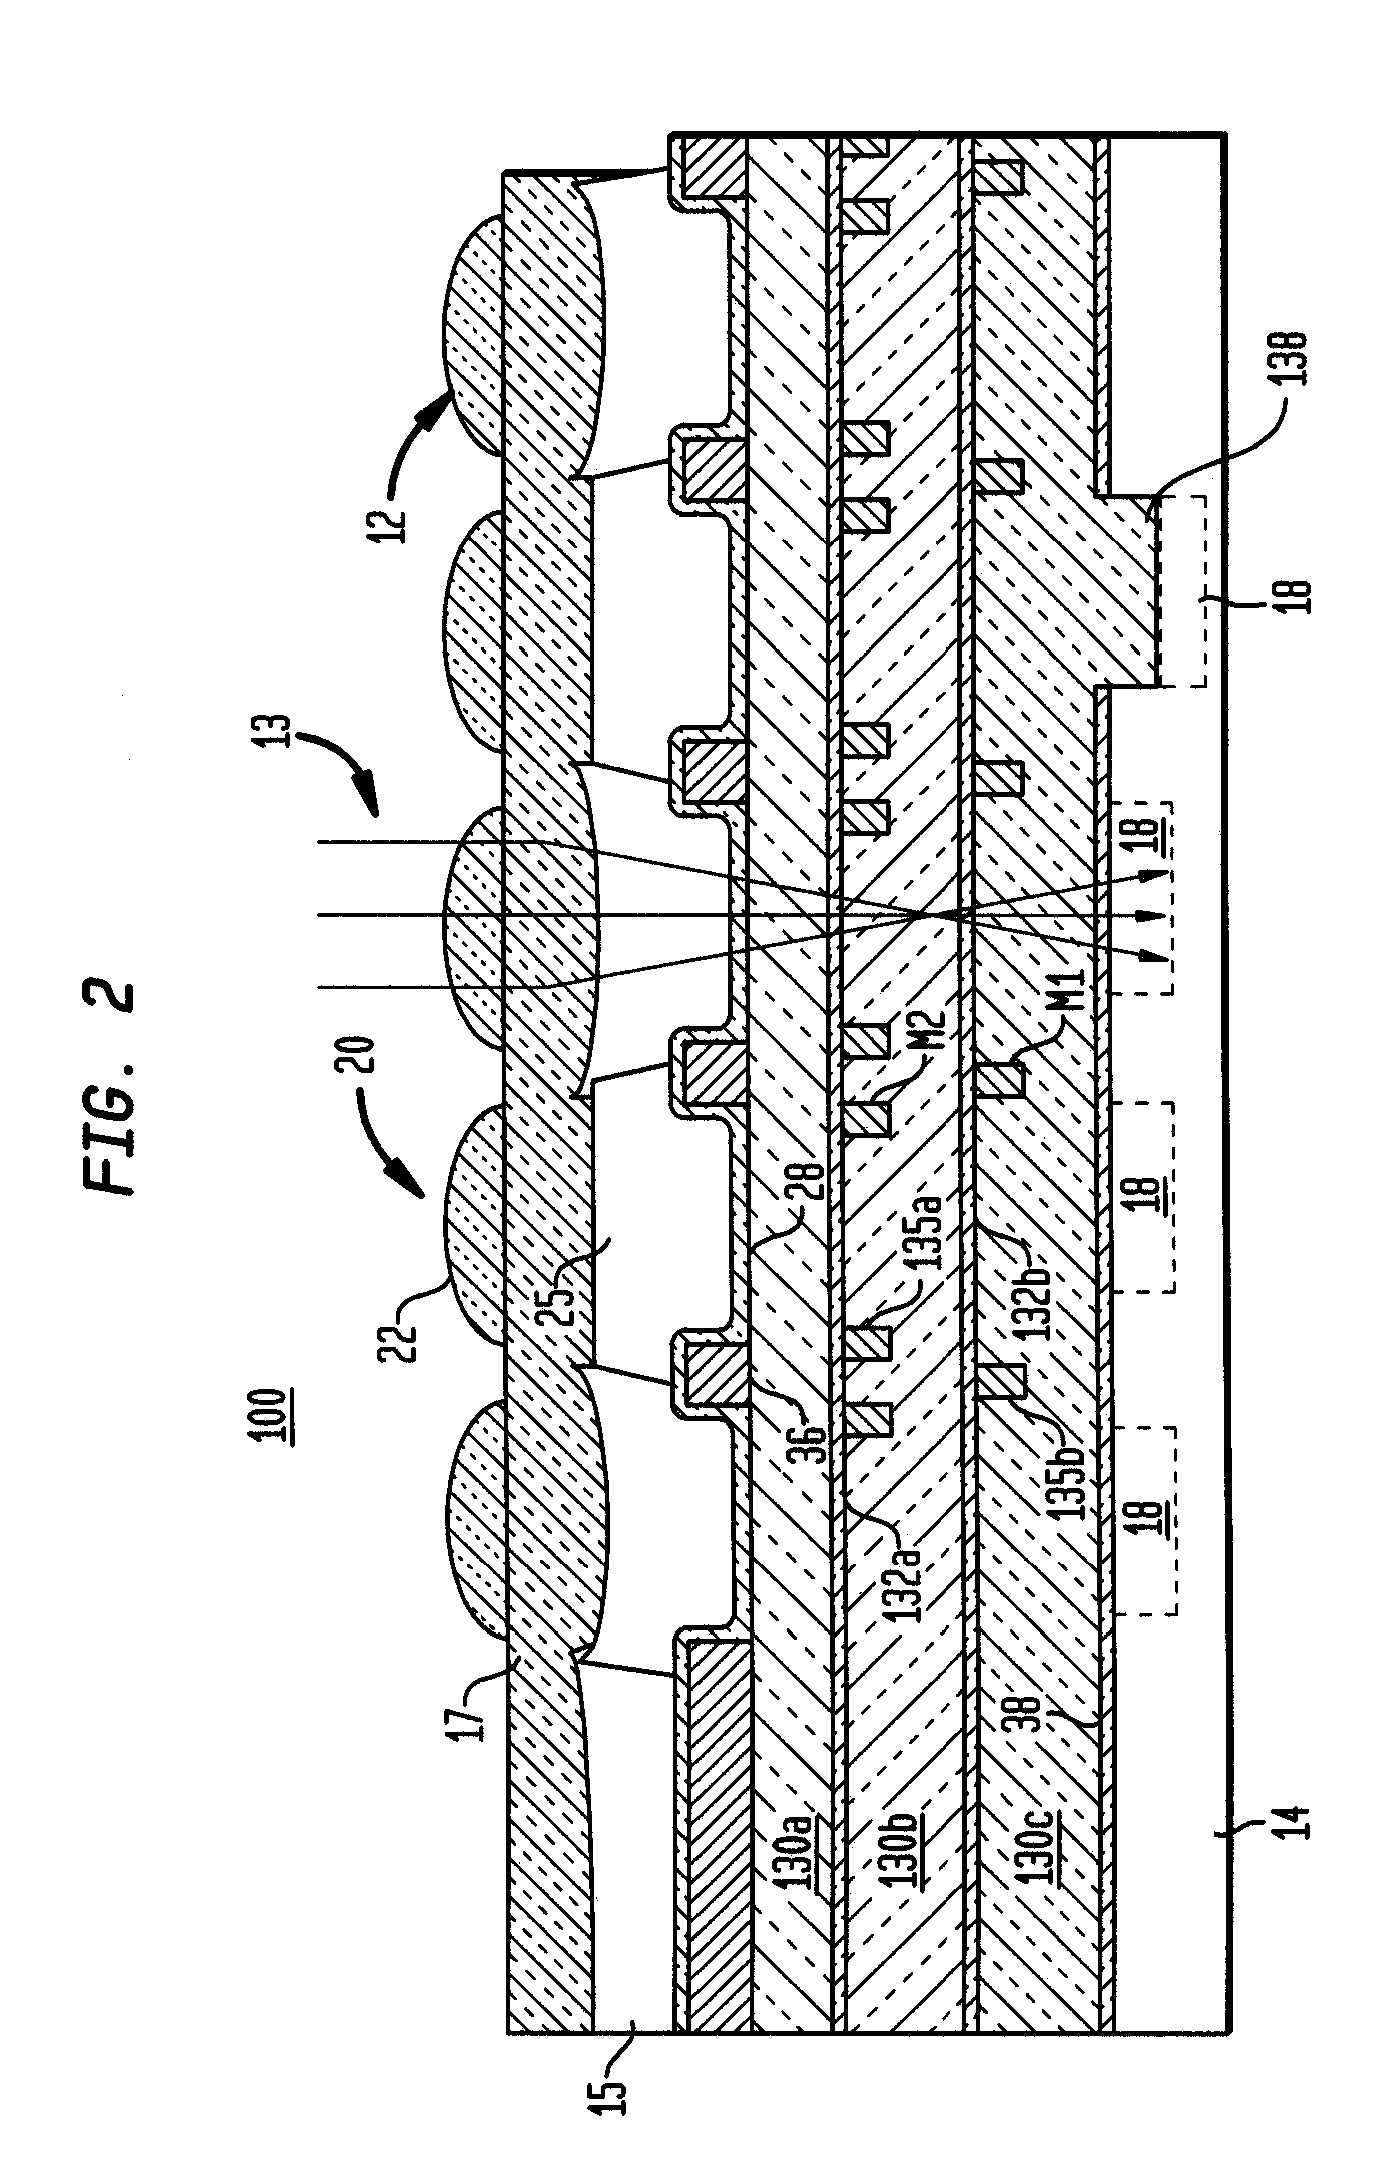 CMOS imager with Cu wiring and method of eliminating high reflectivity interfaces therefrom